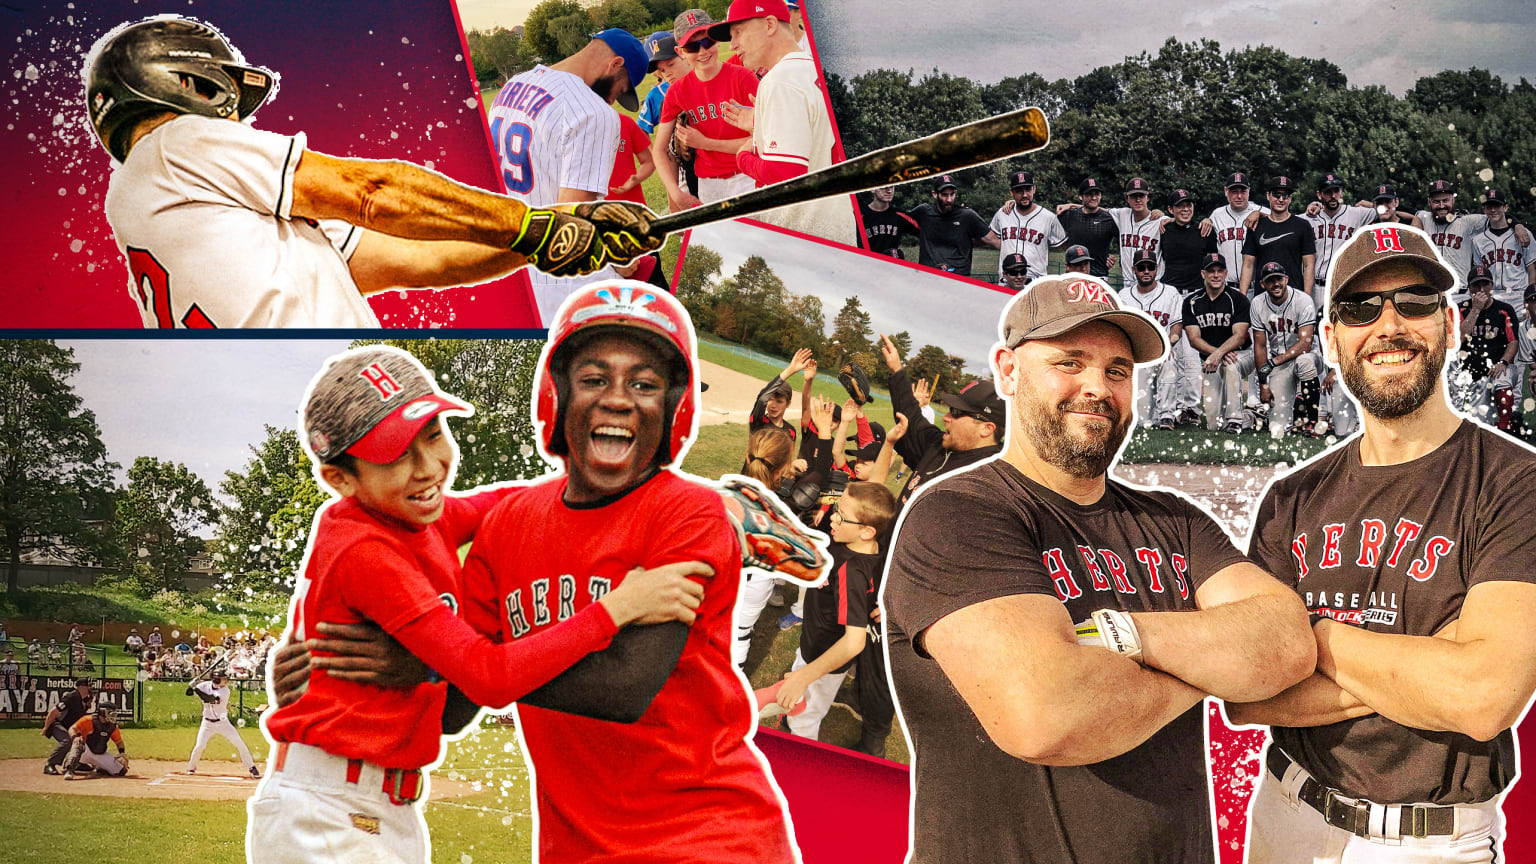 A montage of photos from the Herts Baseball club near London